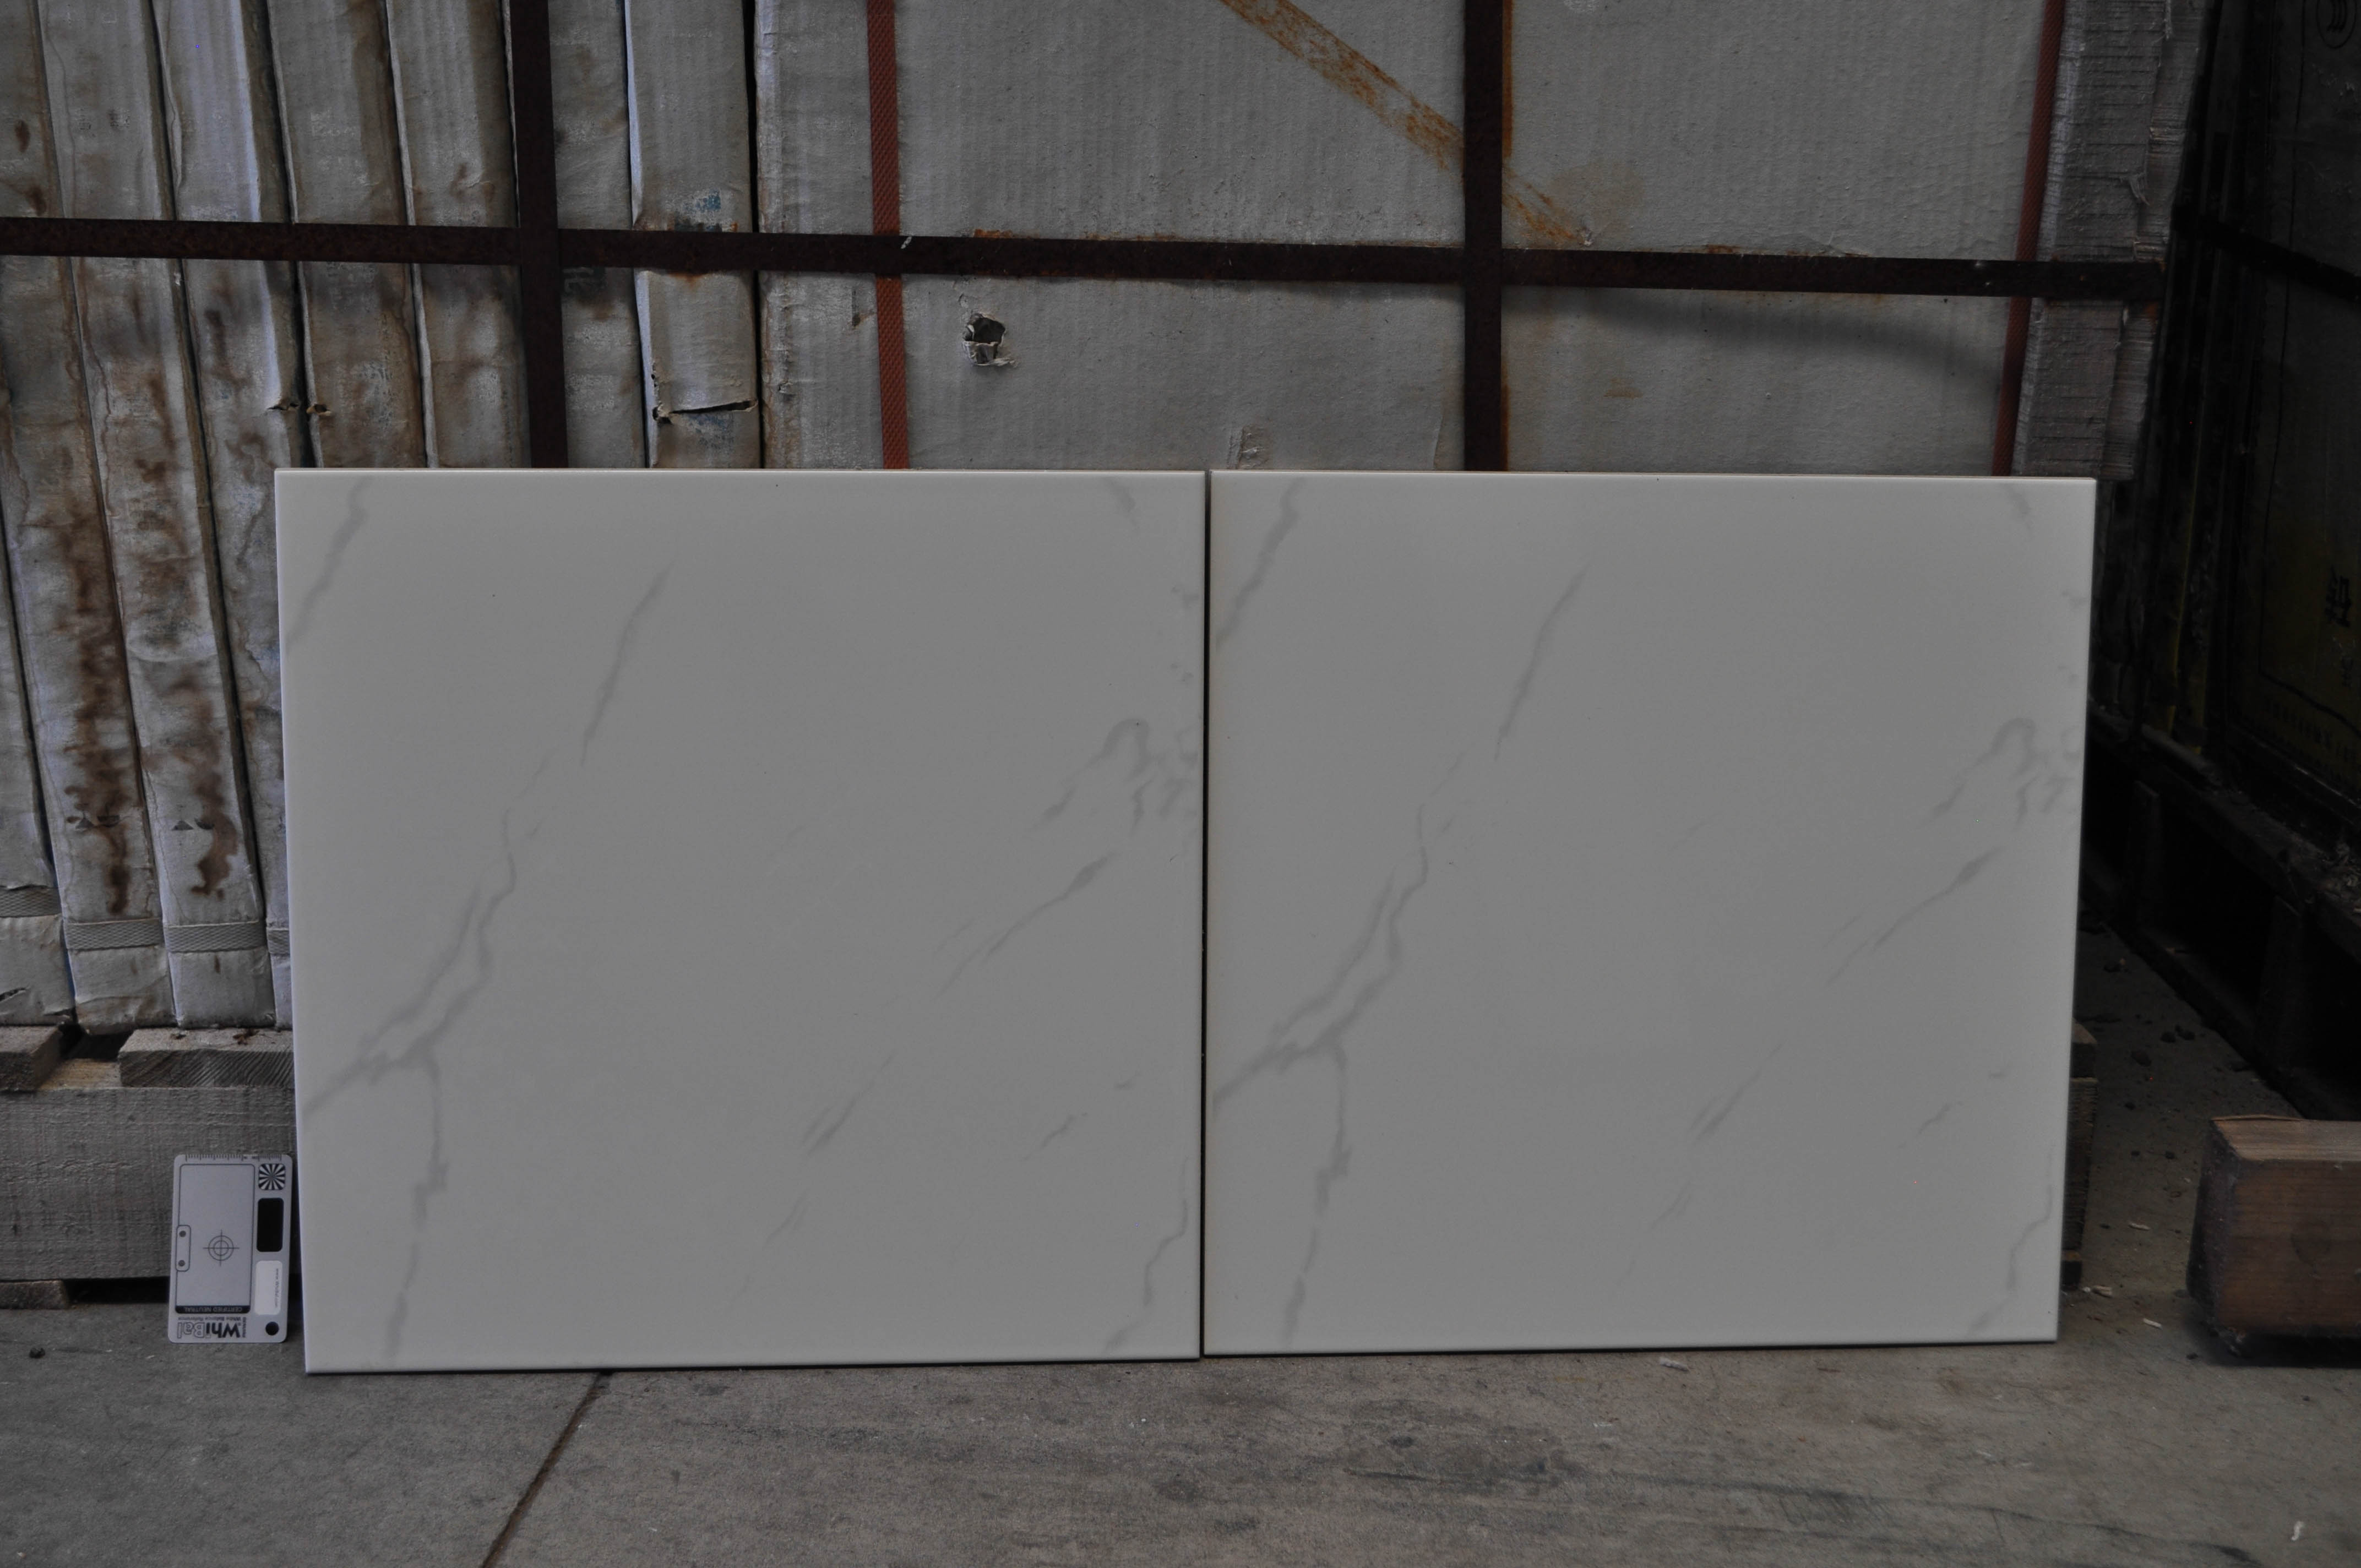 a sales sample of a 60cm x 60cm porcelain tile available for purchase from Concord Floors